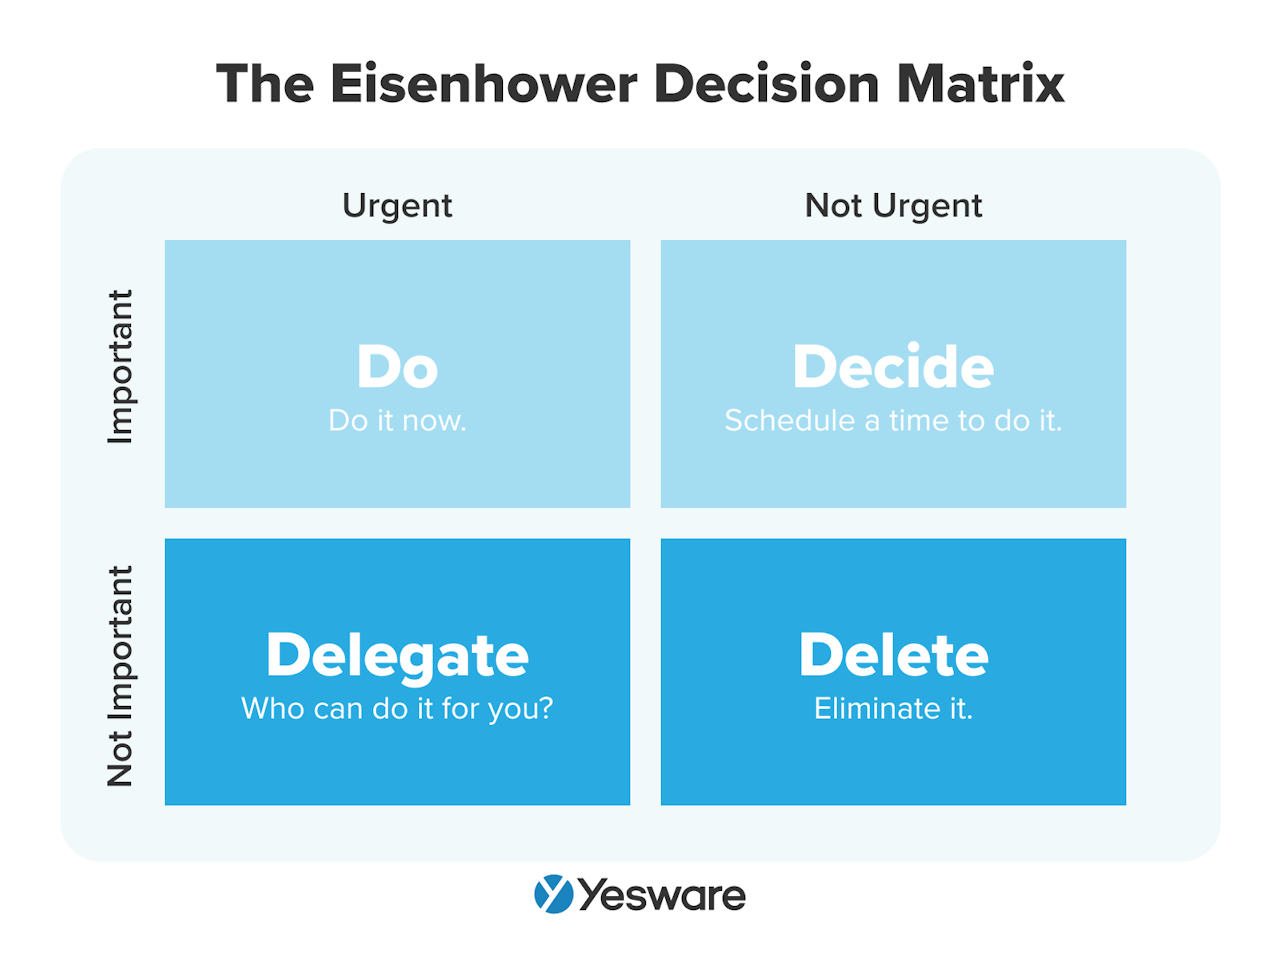 Email prioritization strategy: The Eisenhower Decision Matrix